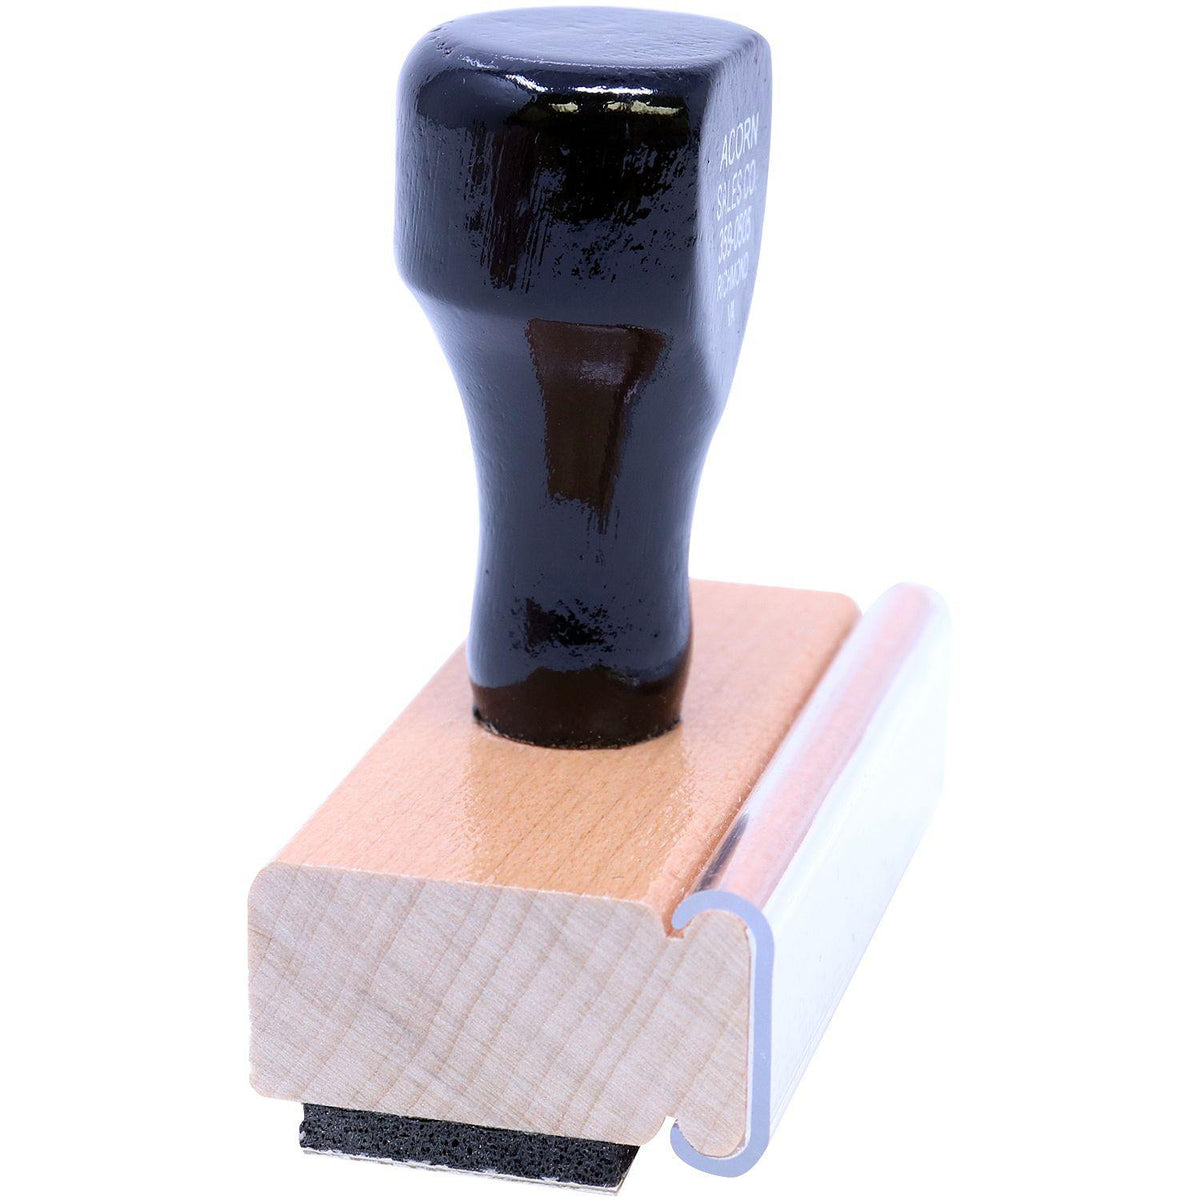 Side View of Blue Cross Rubber Stamp at an Angle